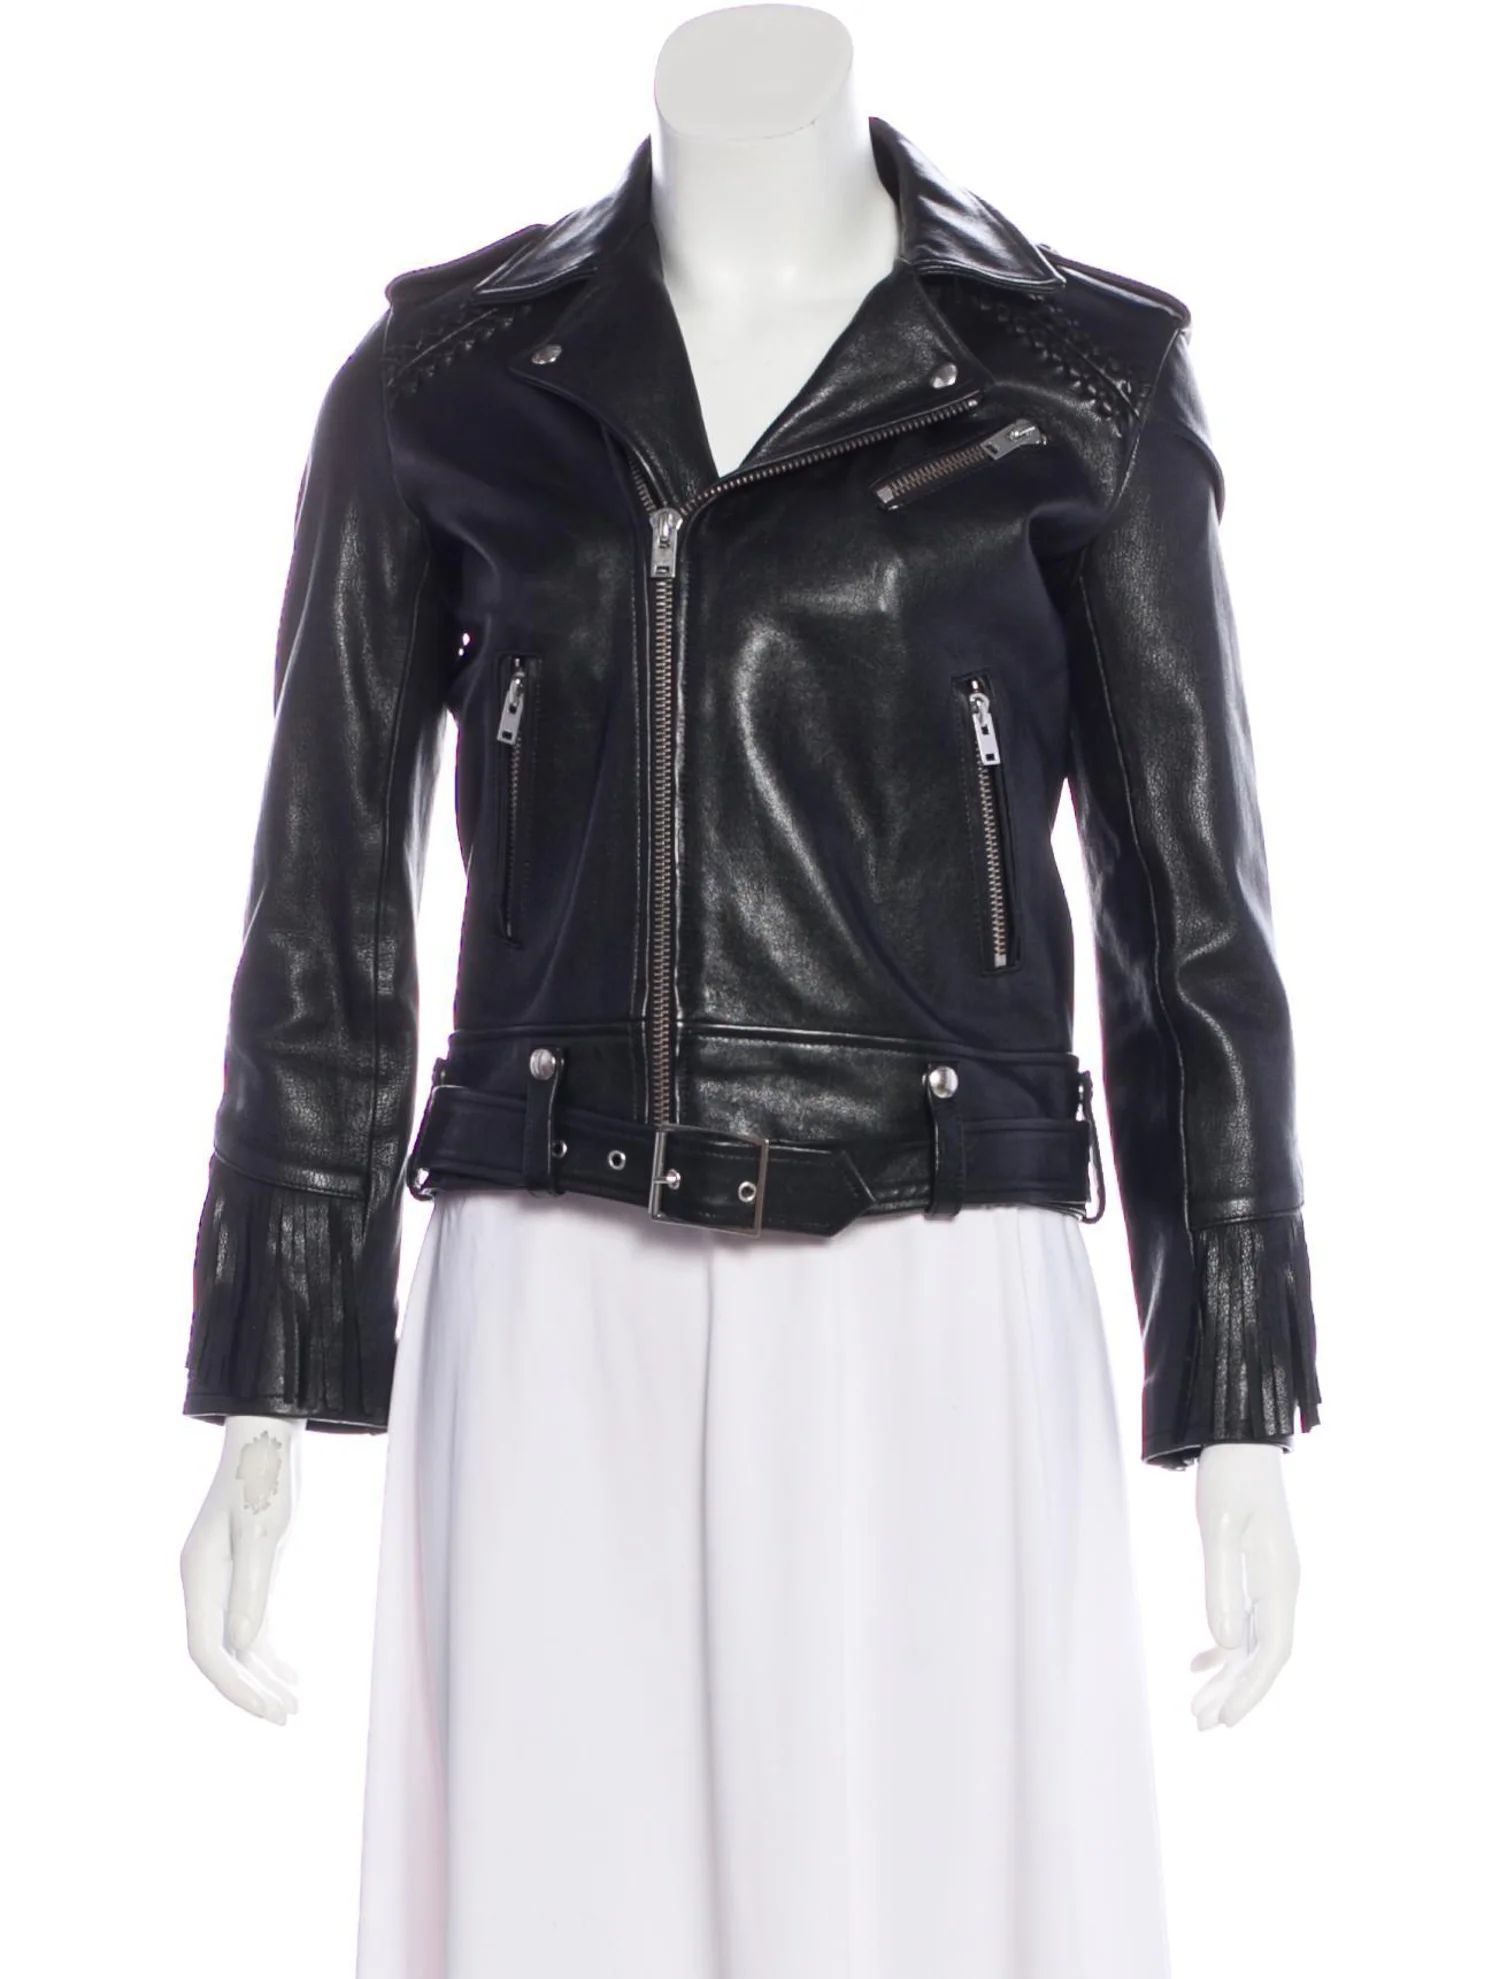 Iro Leather Biker Jacket - Clothing -
          WIR60933 | The RealReal | The RealReal